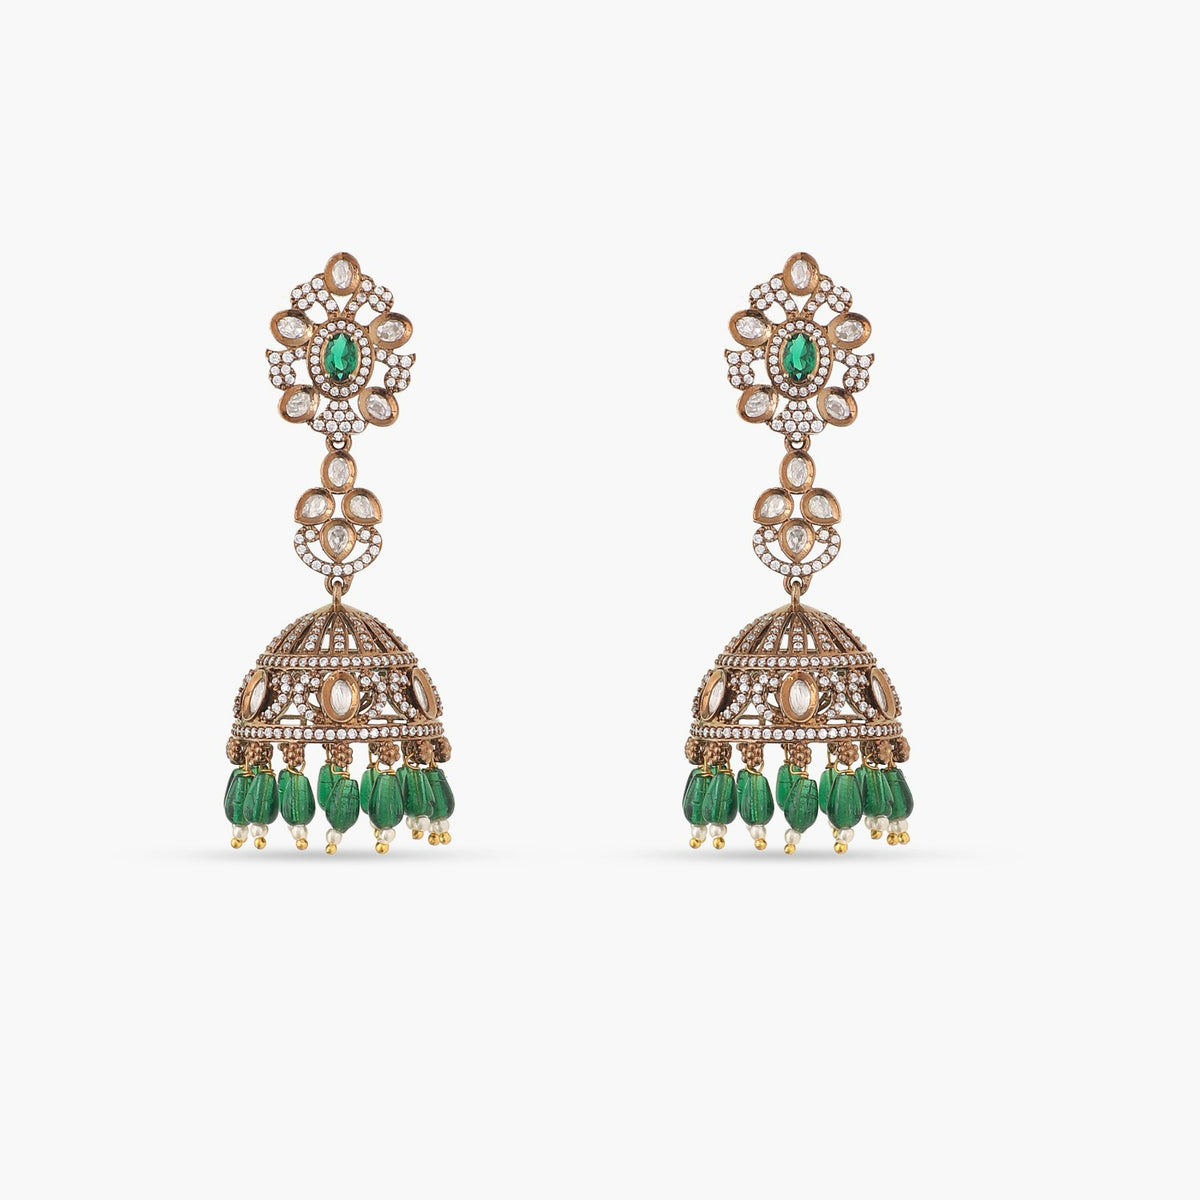 A picture of a pair of Indian artificial jhumka earrings with green gemstones and Cubic Zirconia stones on a white surface.